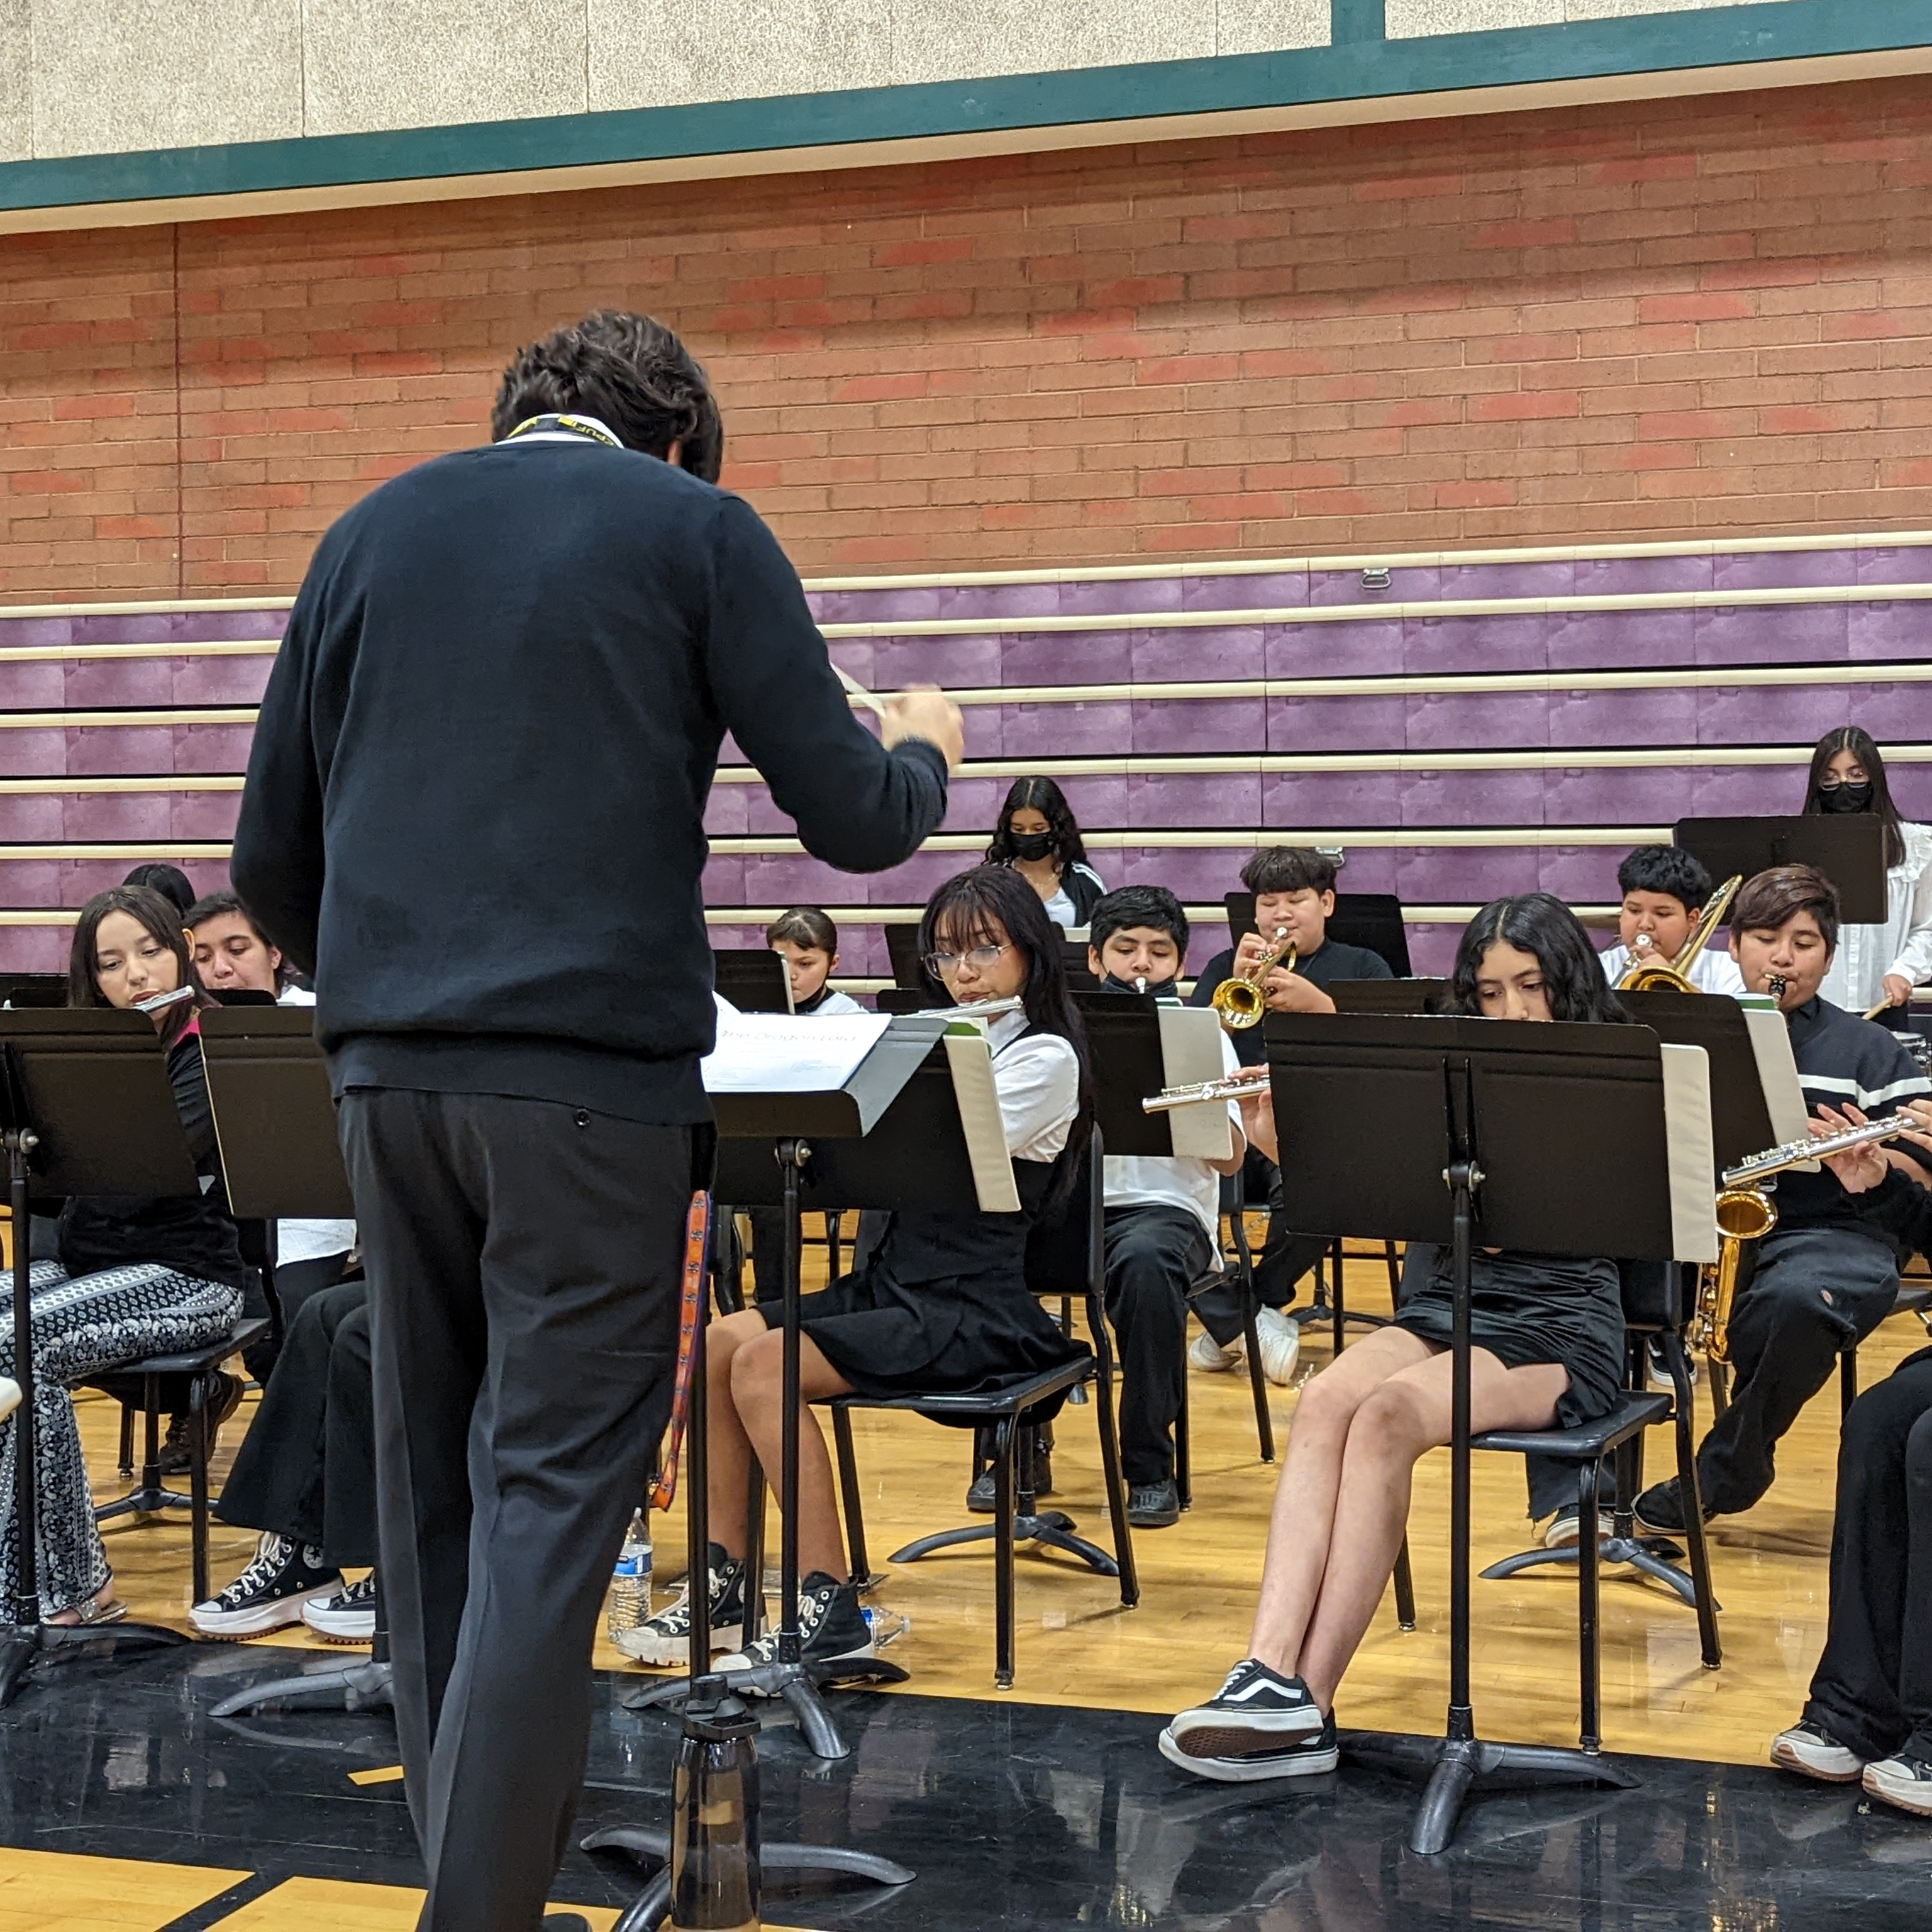 Band teacher and band students playing instruments